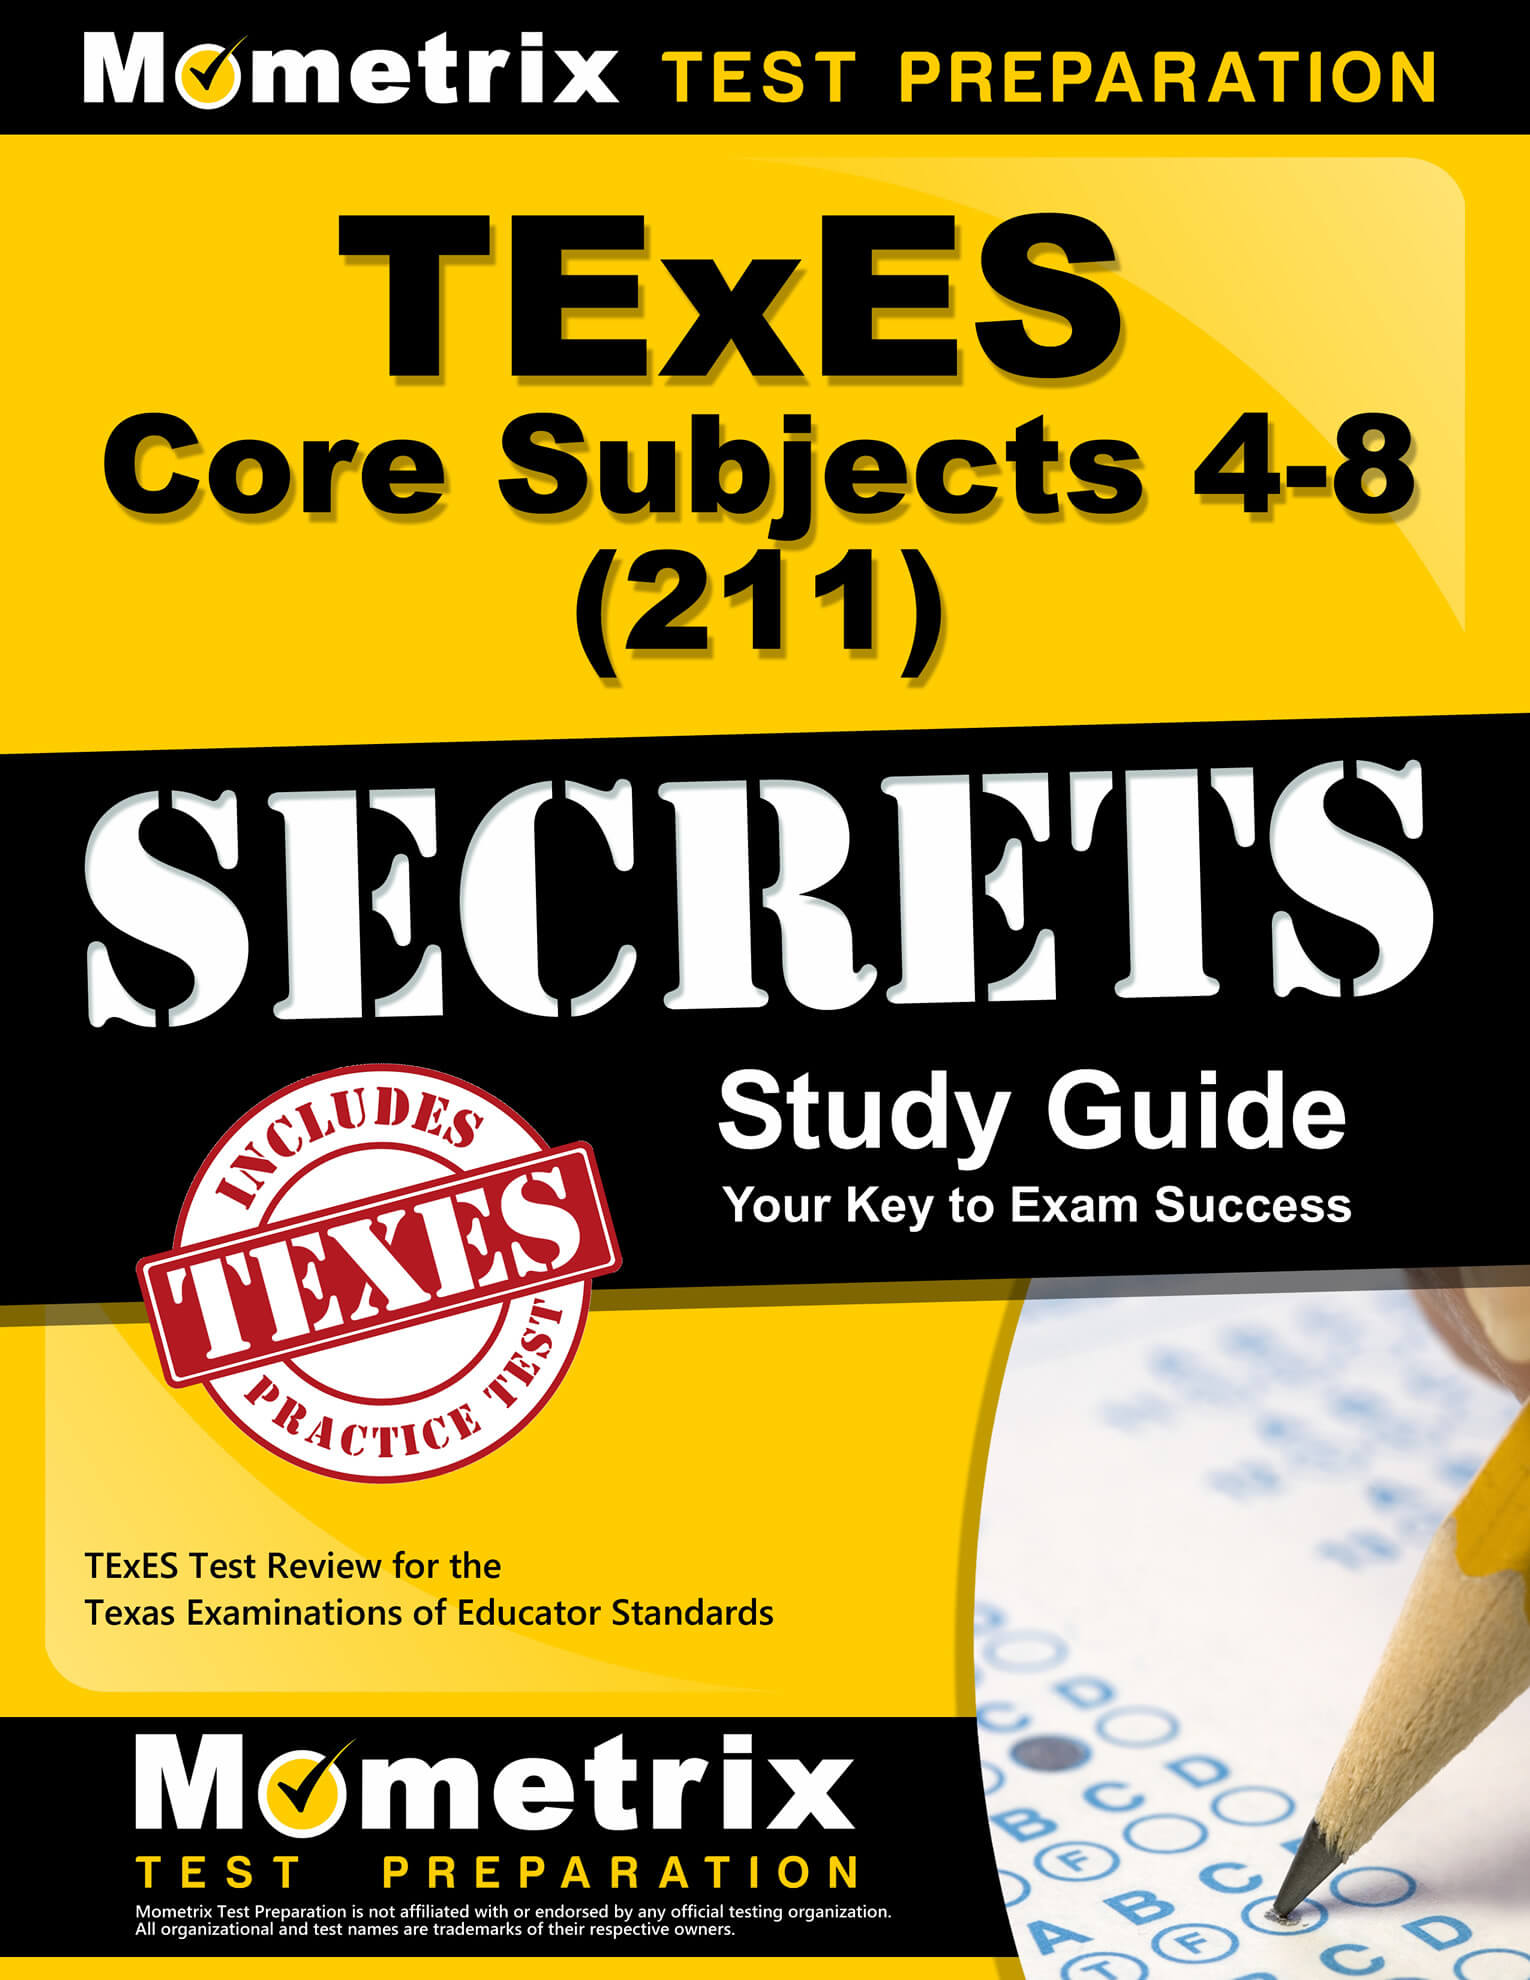 TExES Core Subjects 4-8 Study Guide